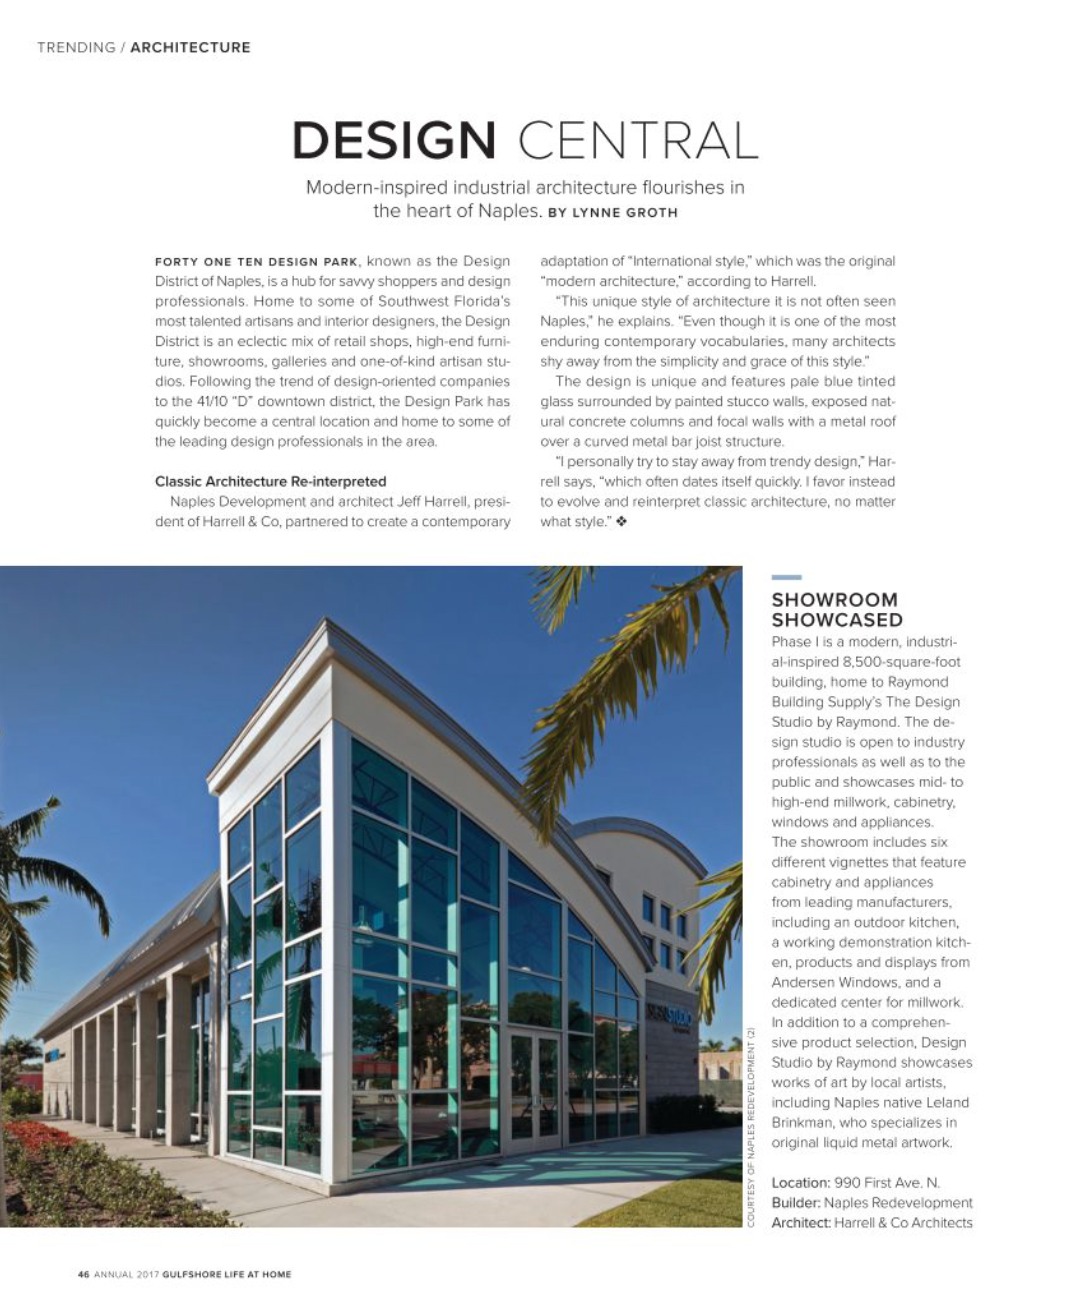 Republic of Decor, owned by David Fruscione (interior designer) in Naples, Florida, is featured by the Design District for Design Central